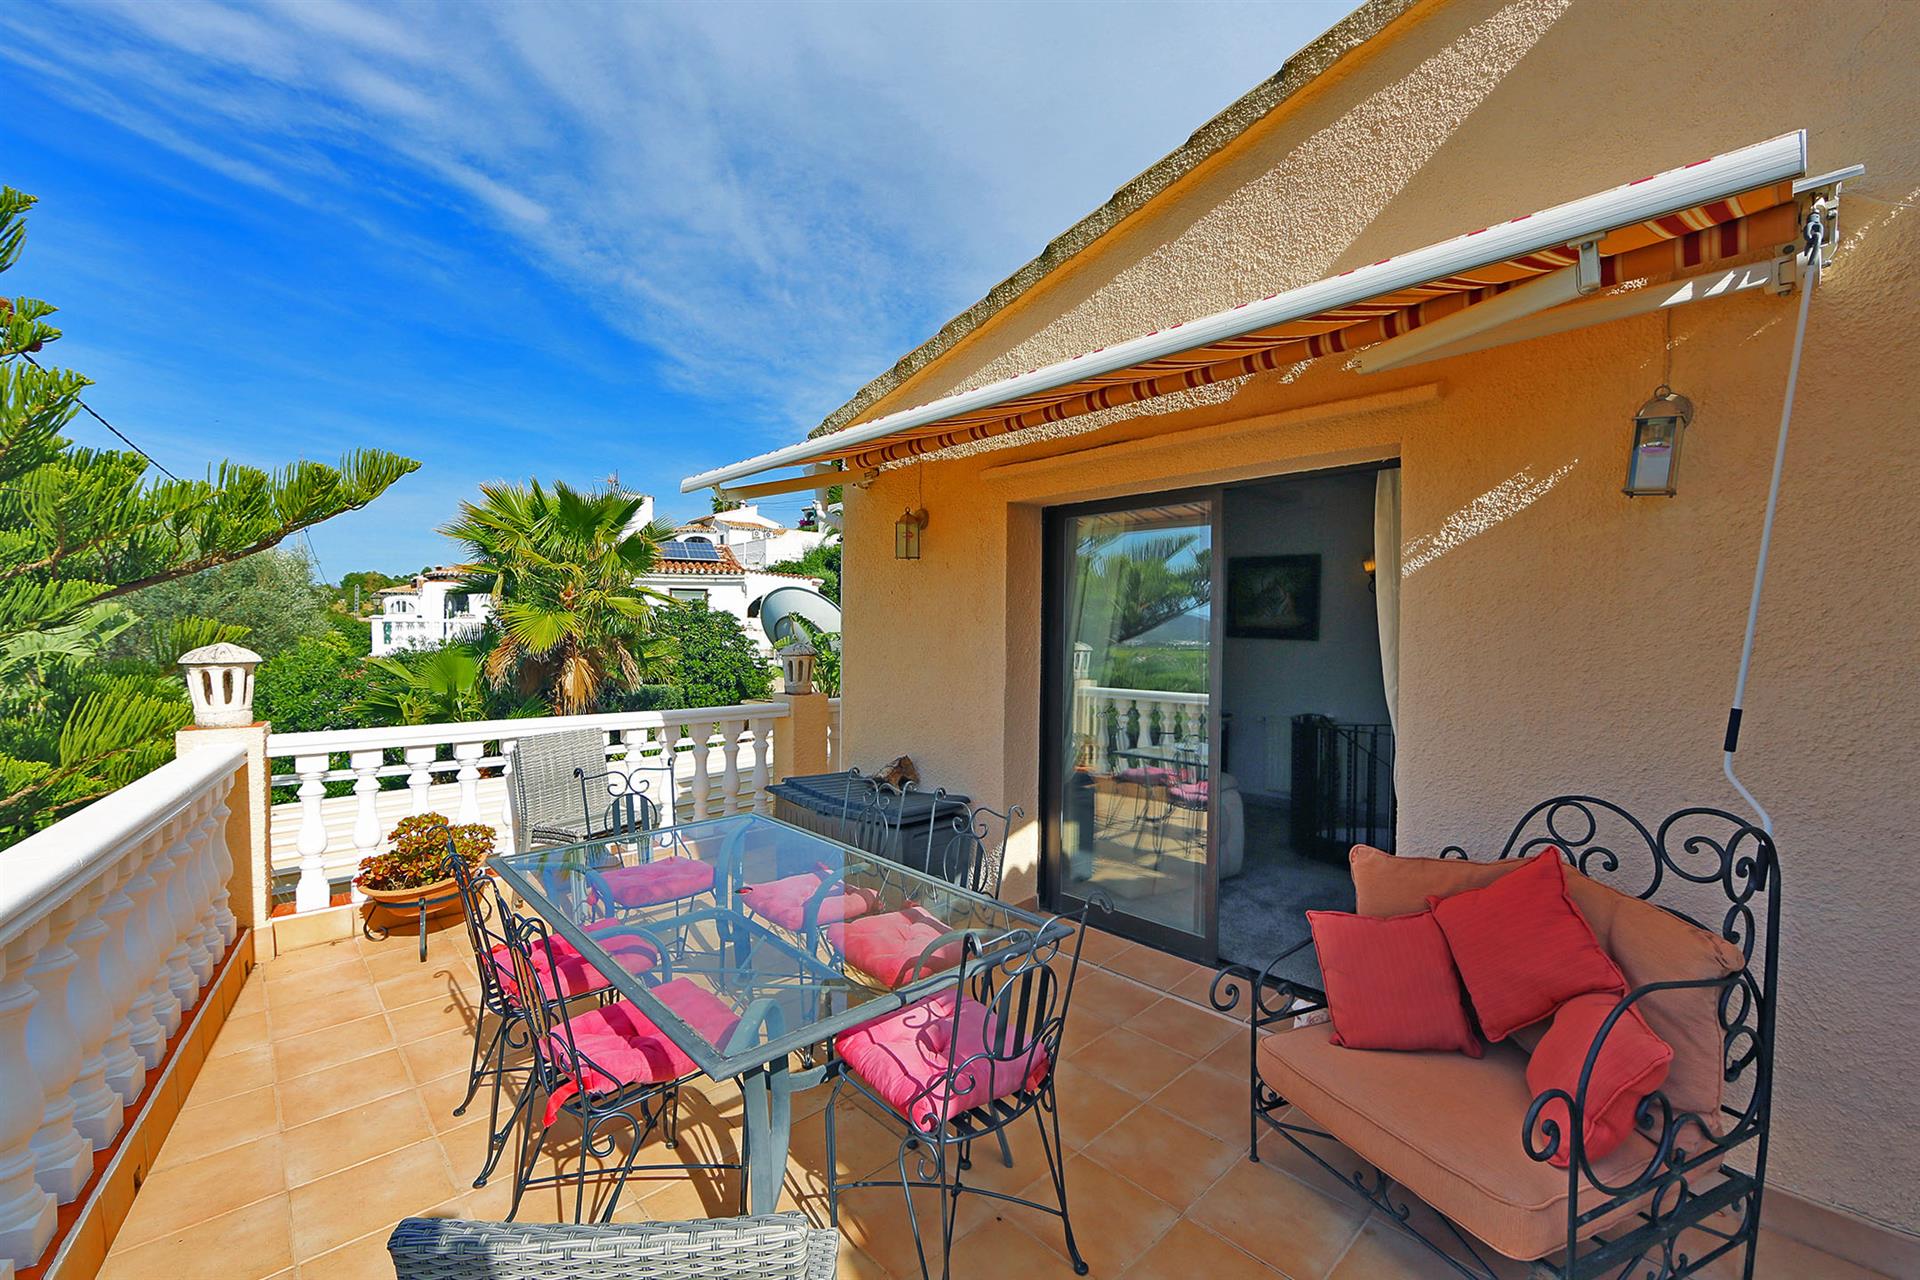 Charming 4 bedroom villa with private pool in Orba